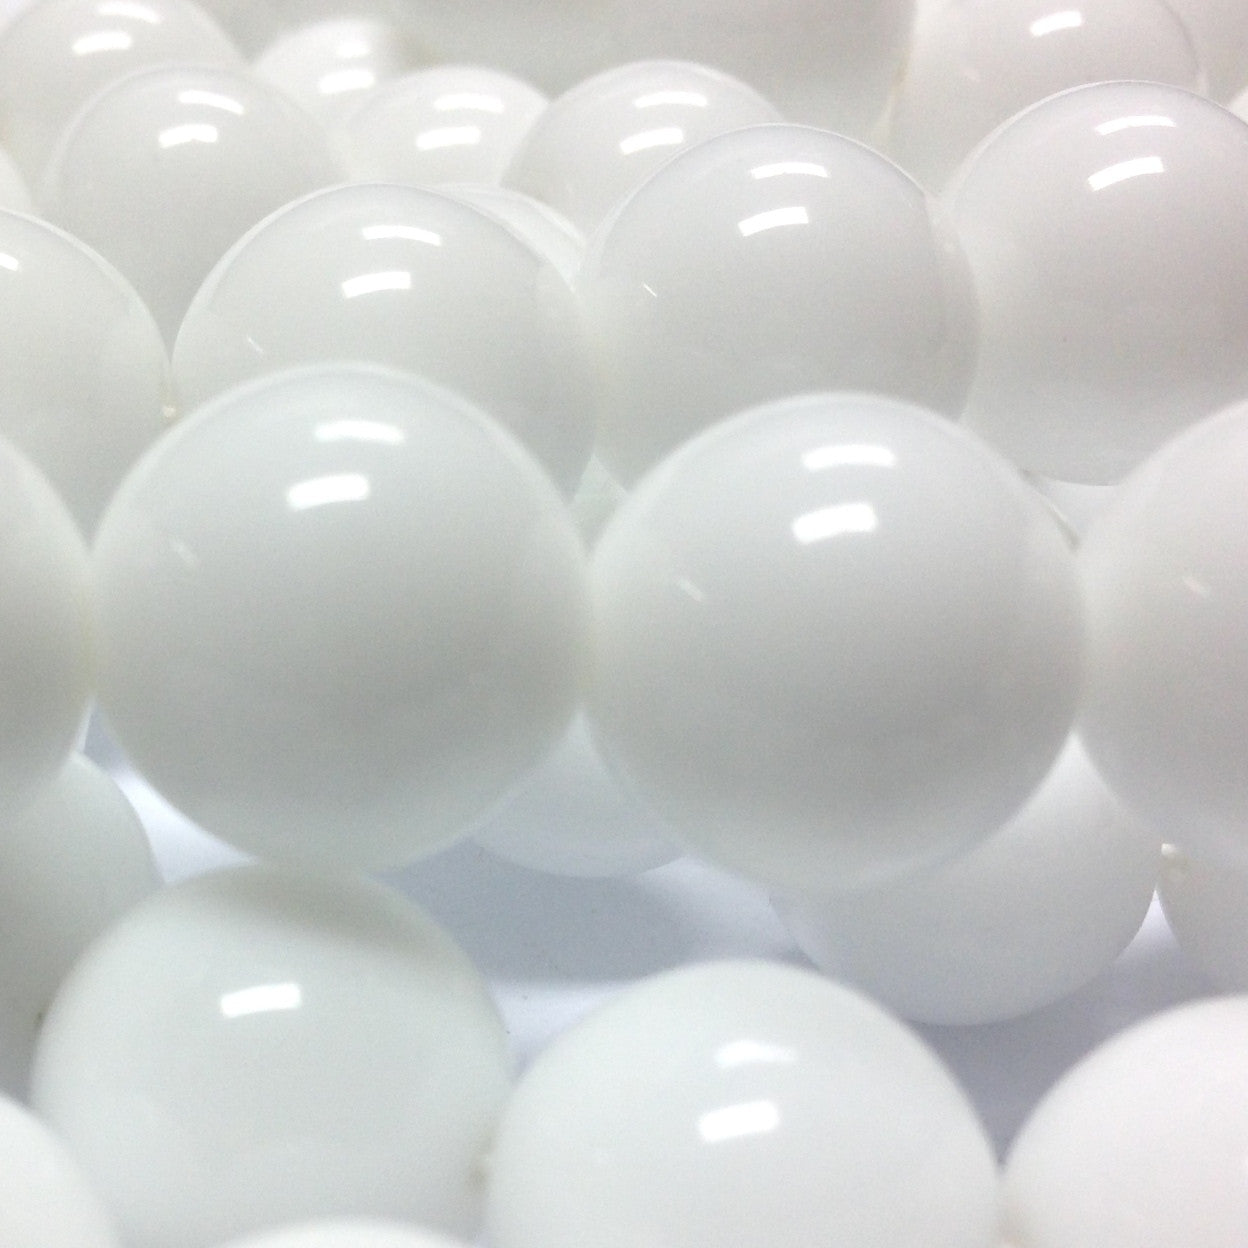 8MM White Round Glass Beads (600 pieces)